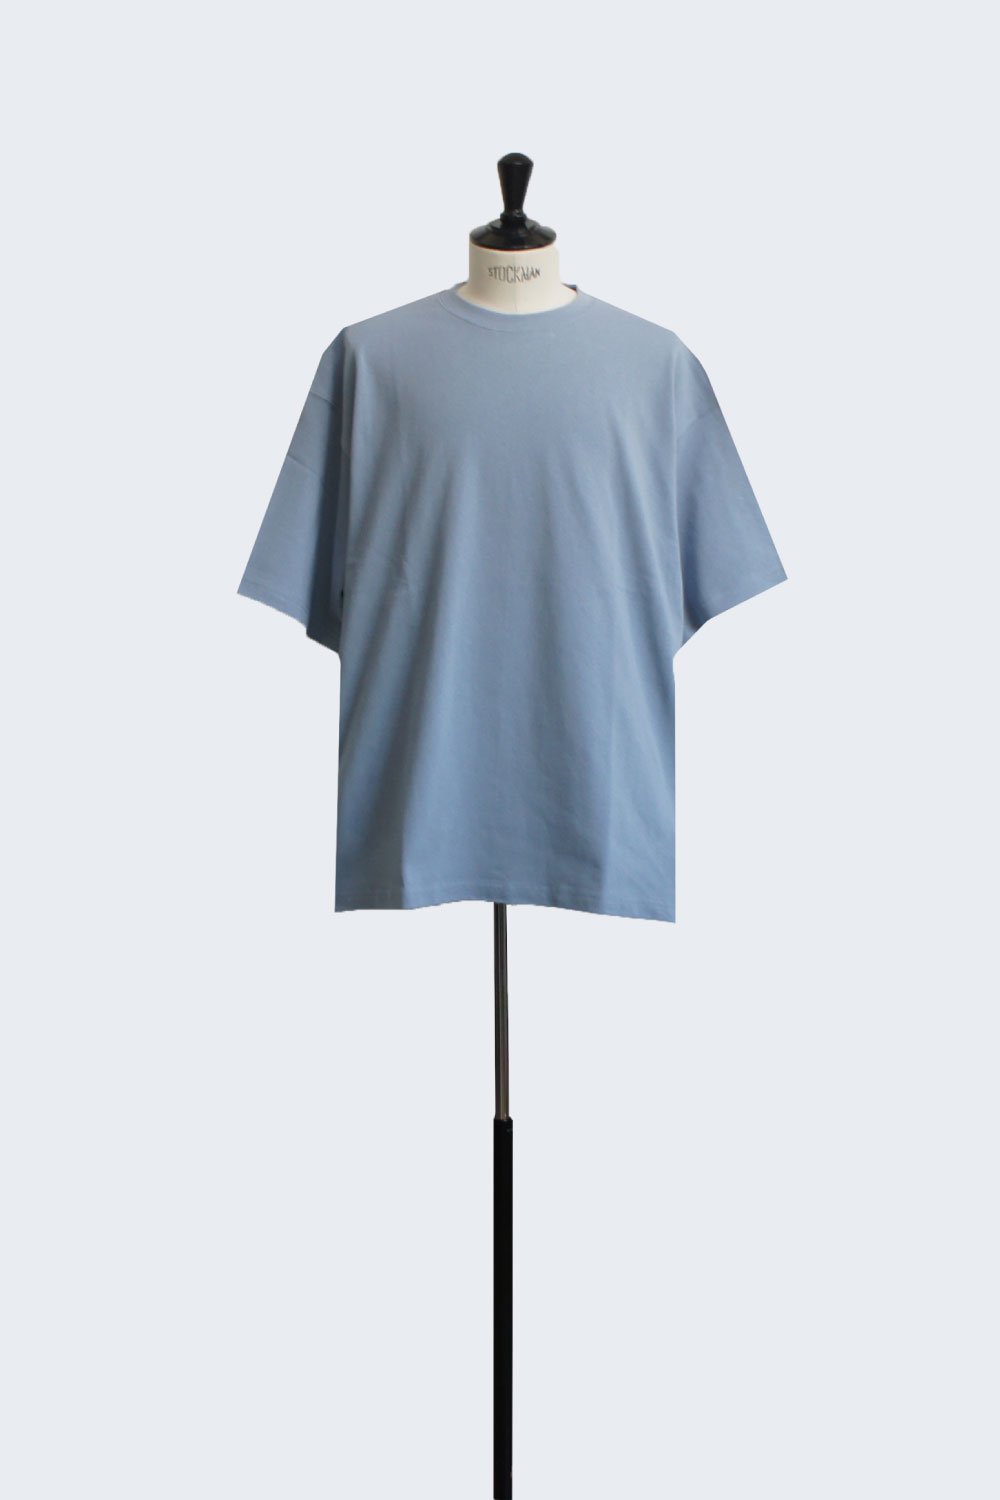 <img class='new_mark_img1' src='https://img.shop-pro.jp/img/new/icons14.gif' style='border:none;display:inline;margin:0px;padding:0px;width:auto;' />22SS_BOX T-SHIRTS_BLUE